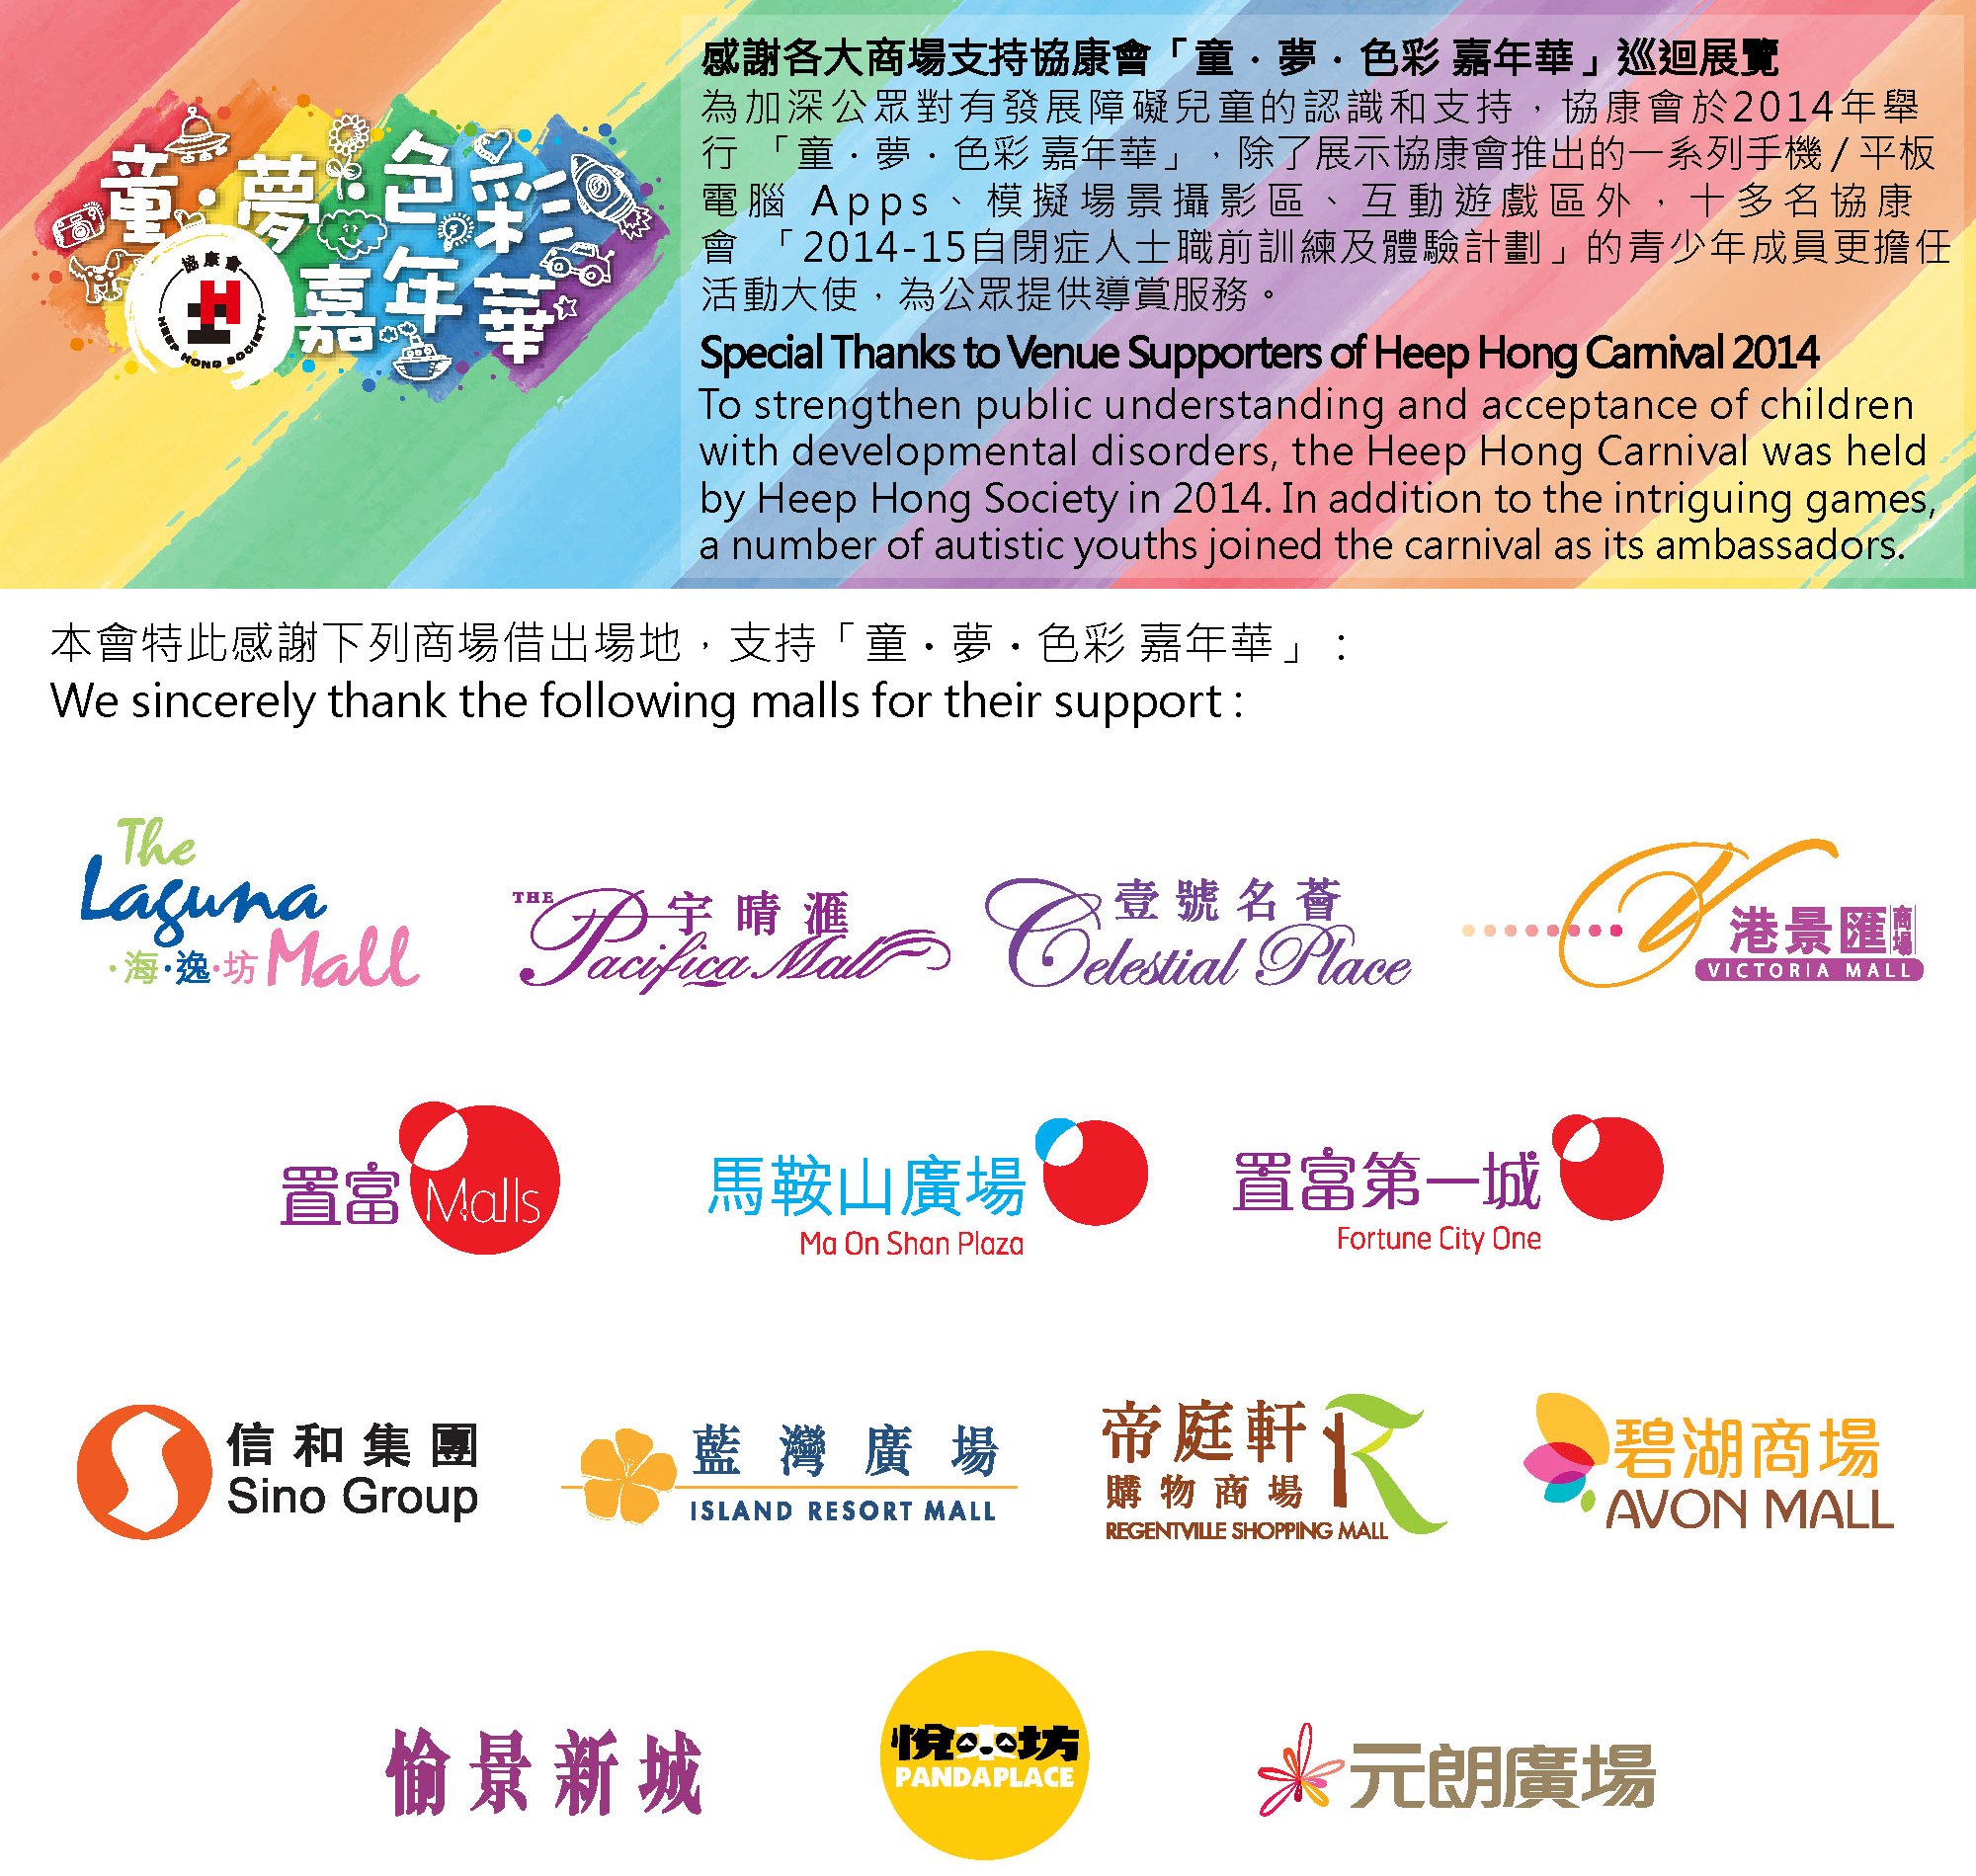 Special Thanks to Venue Supporters of Heep Hong Carnival 2014